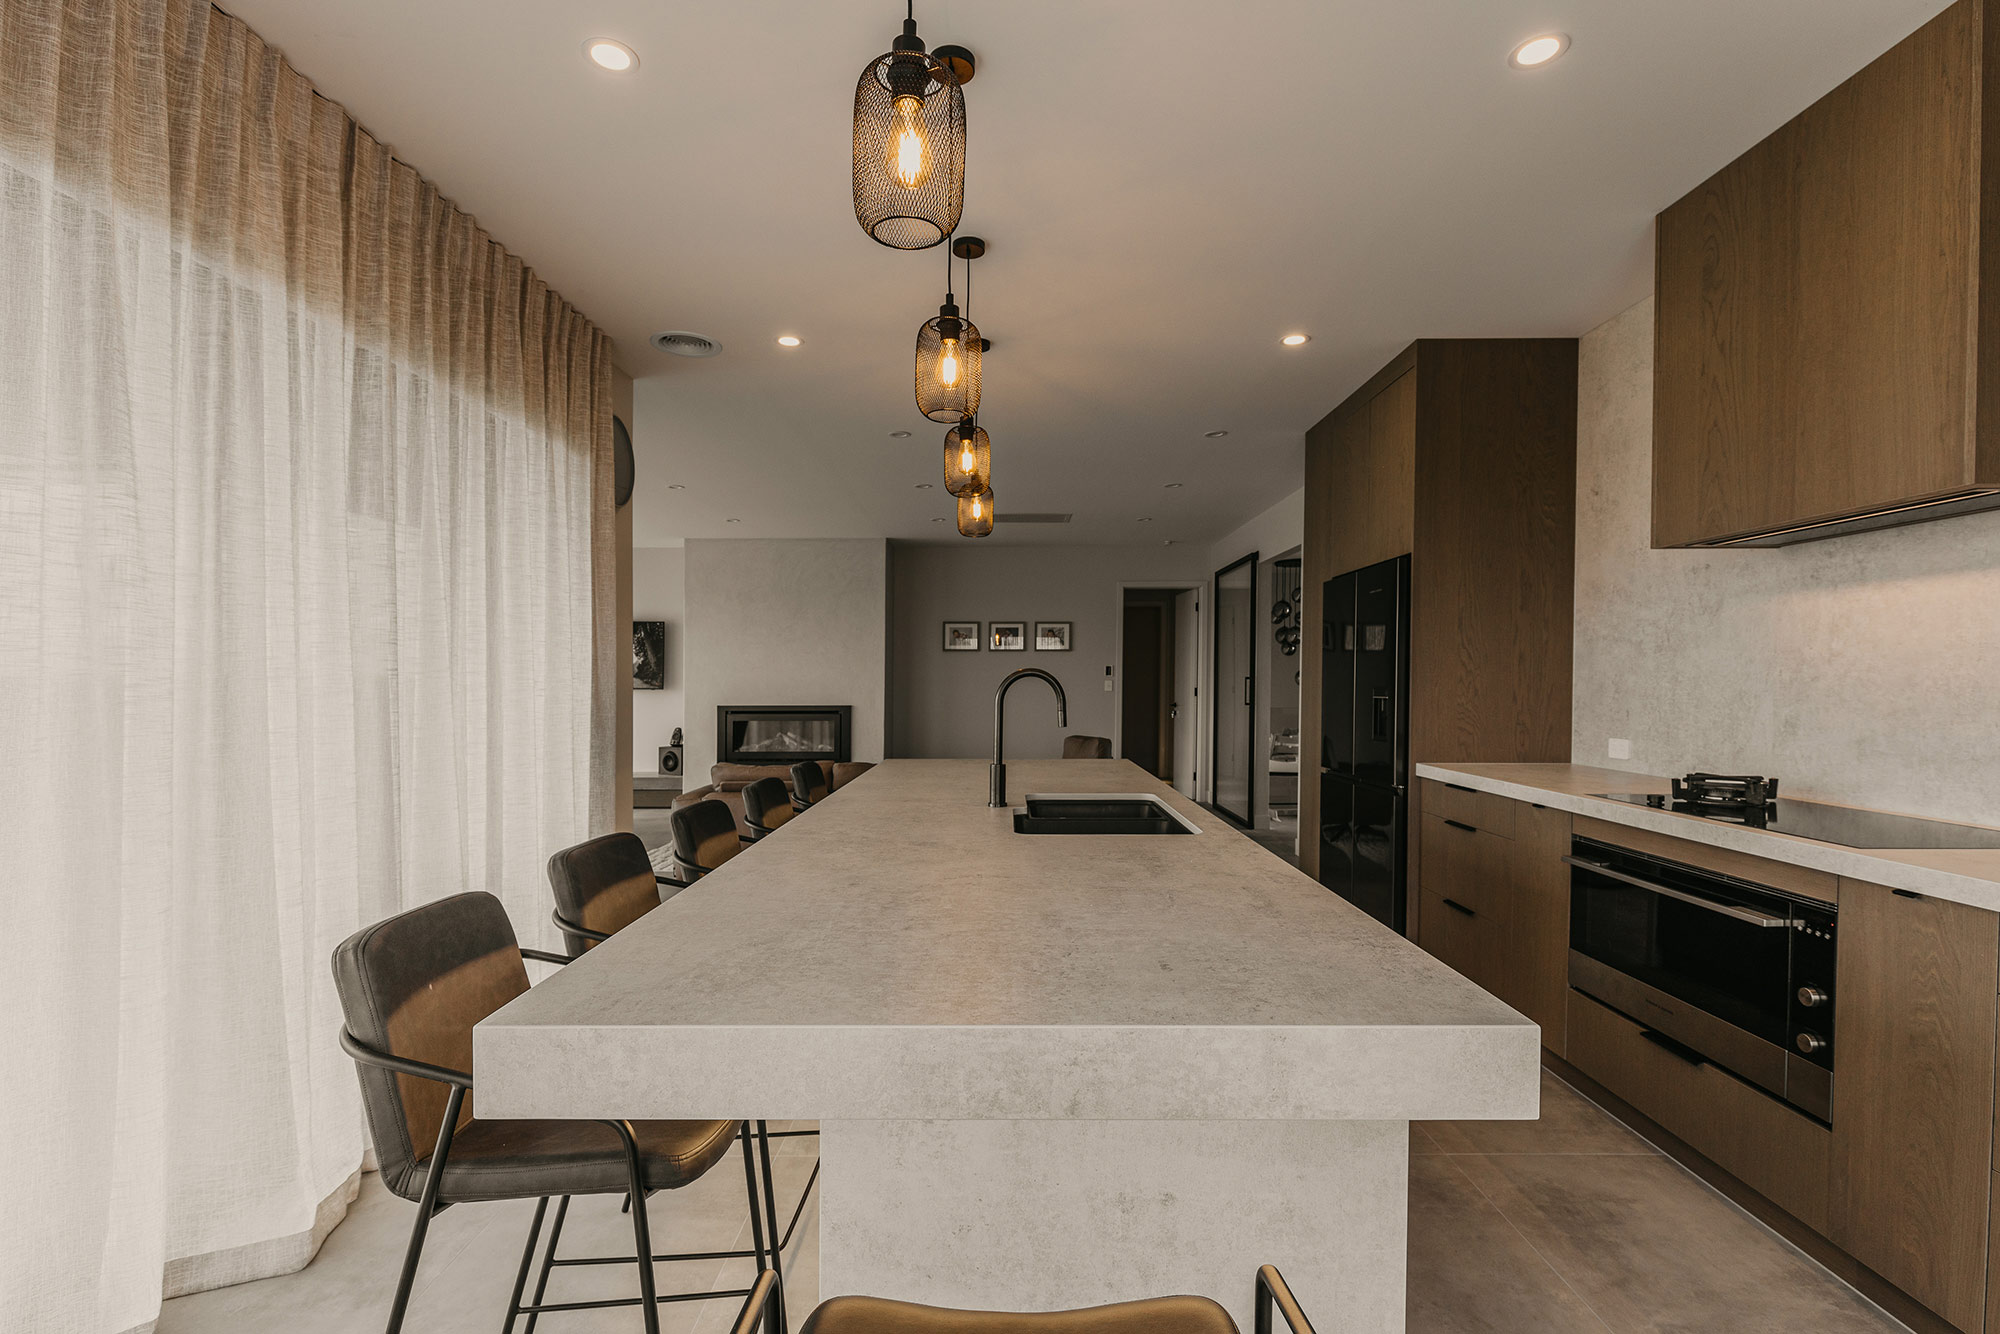 Image of Nicola Ross Kennards AK Photo 9 in Dekton Rem brings warmth and sophistication to a renovated home without the need for building work - Cosentino